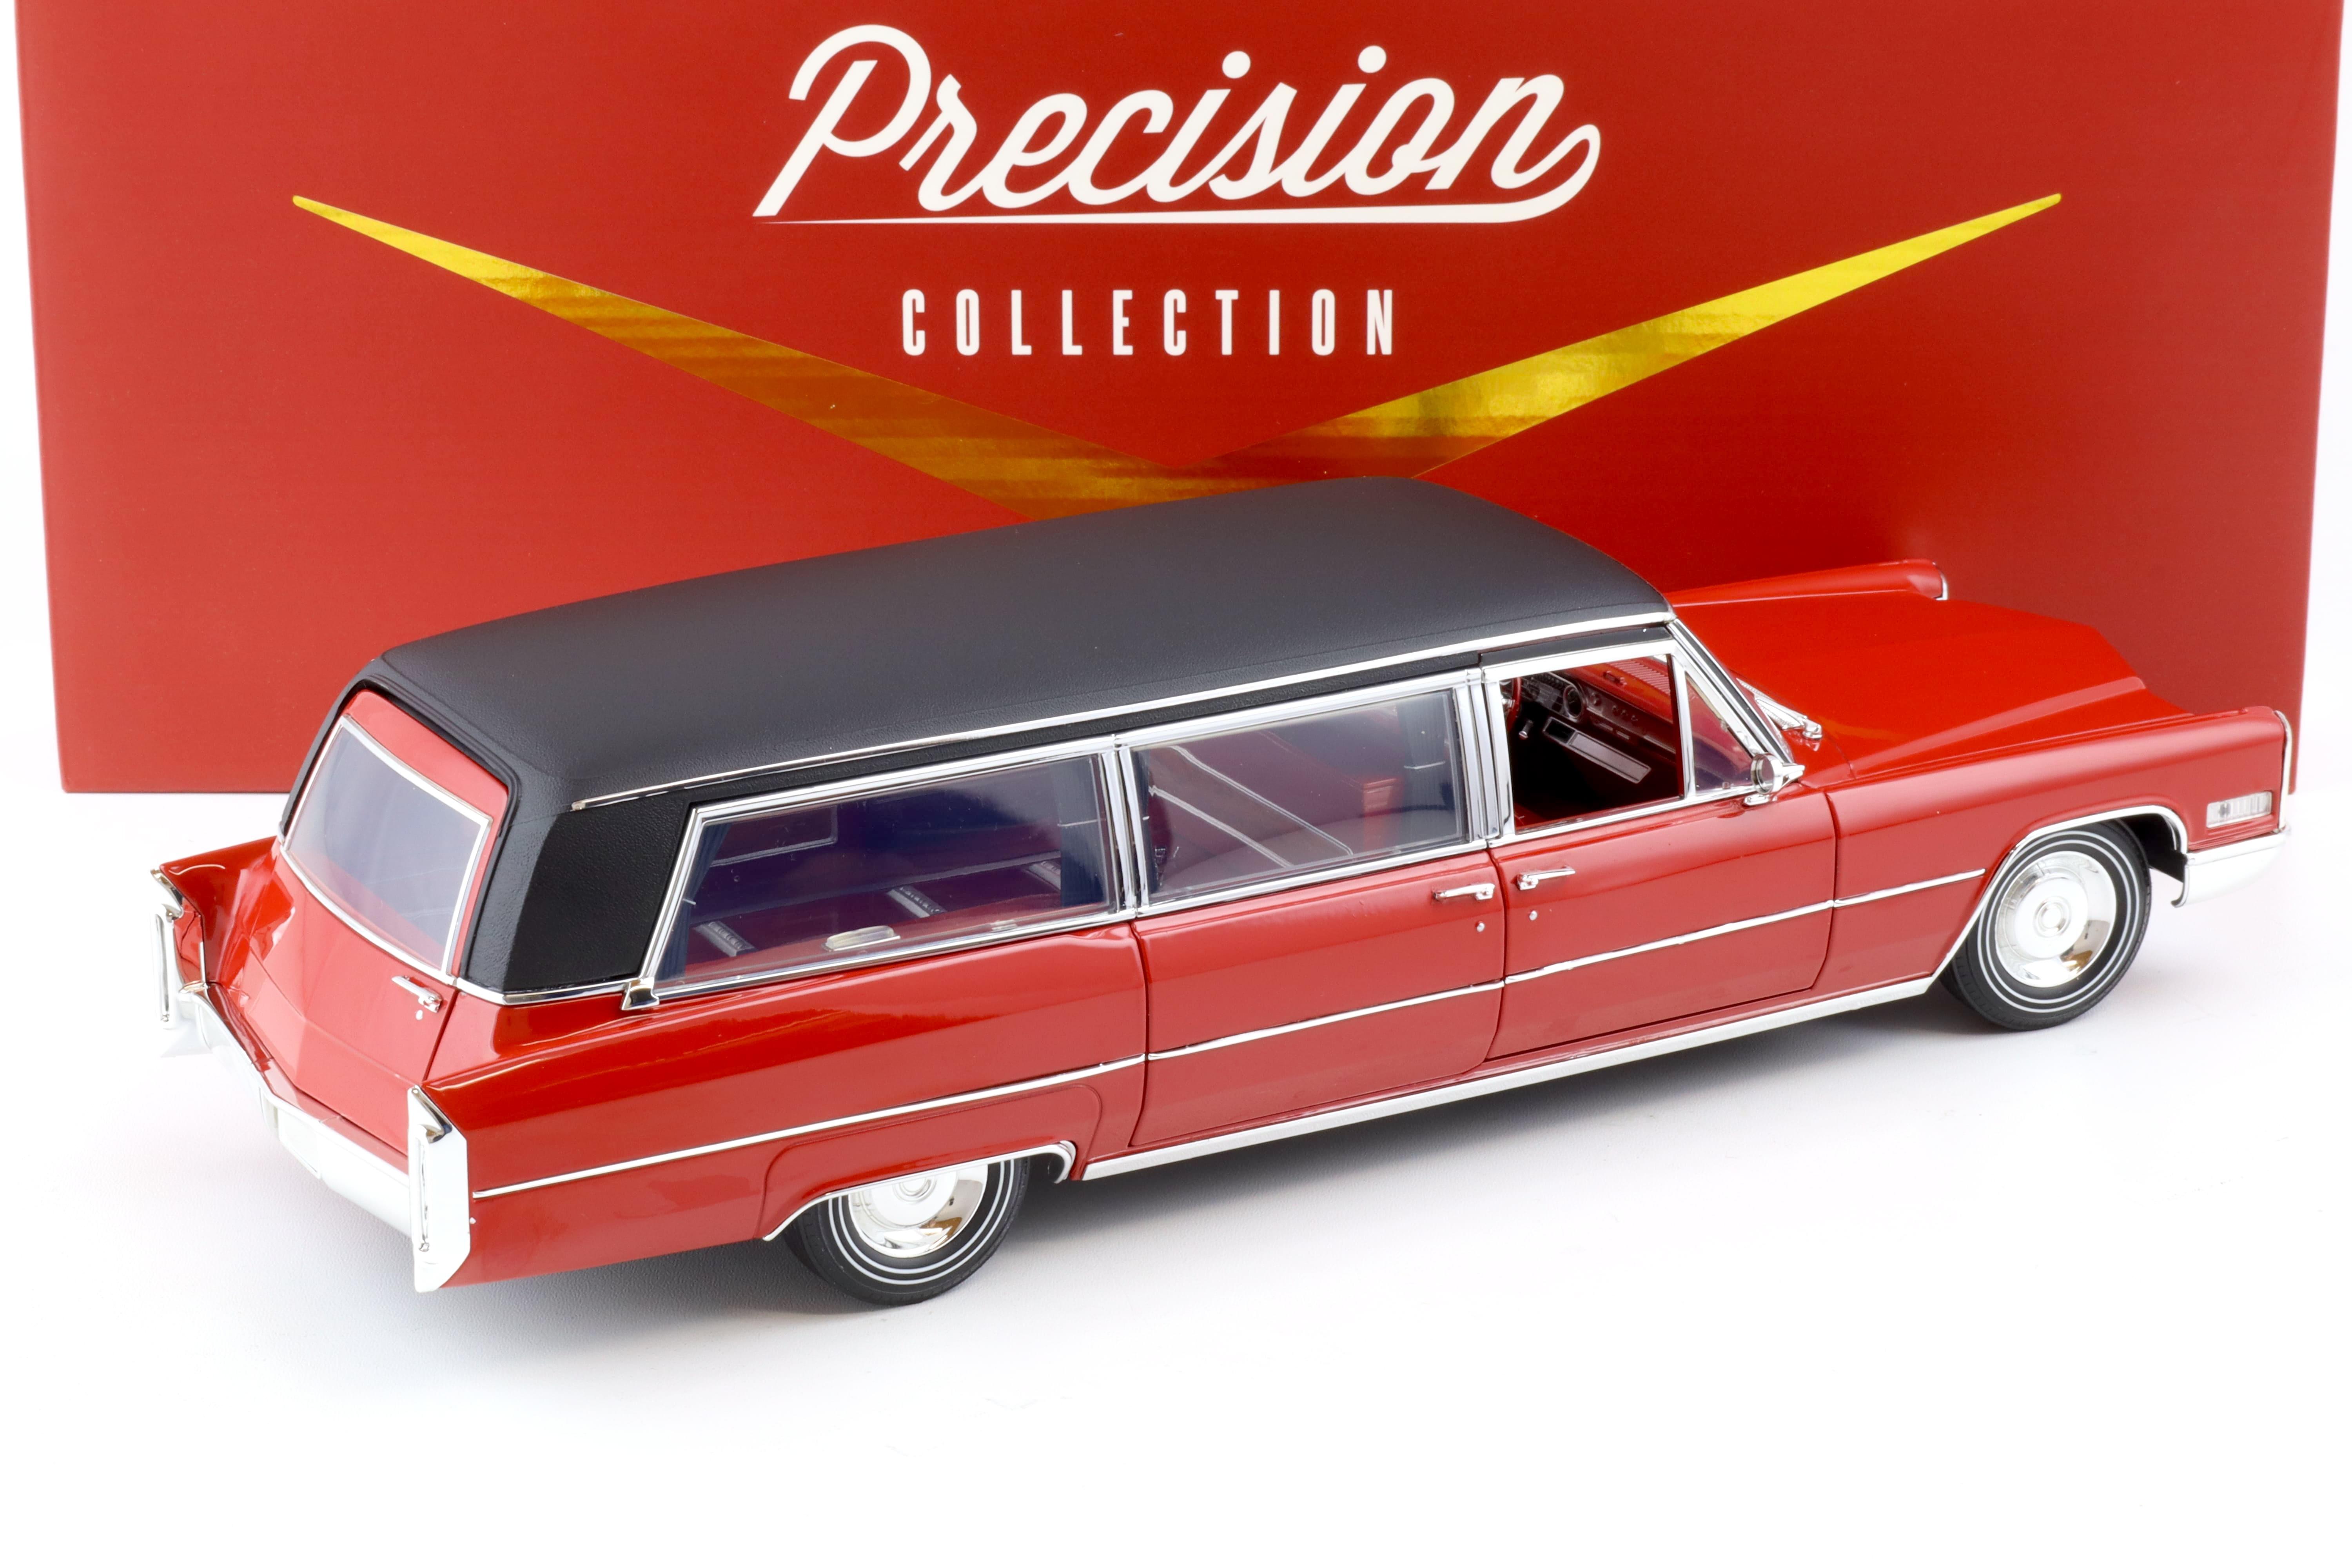 1:18 Greenlight Precision Collection 1966 Cadillac S&S Limousine red/ black